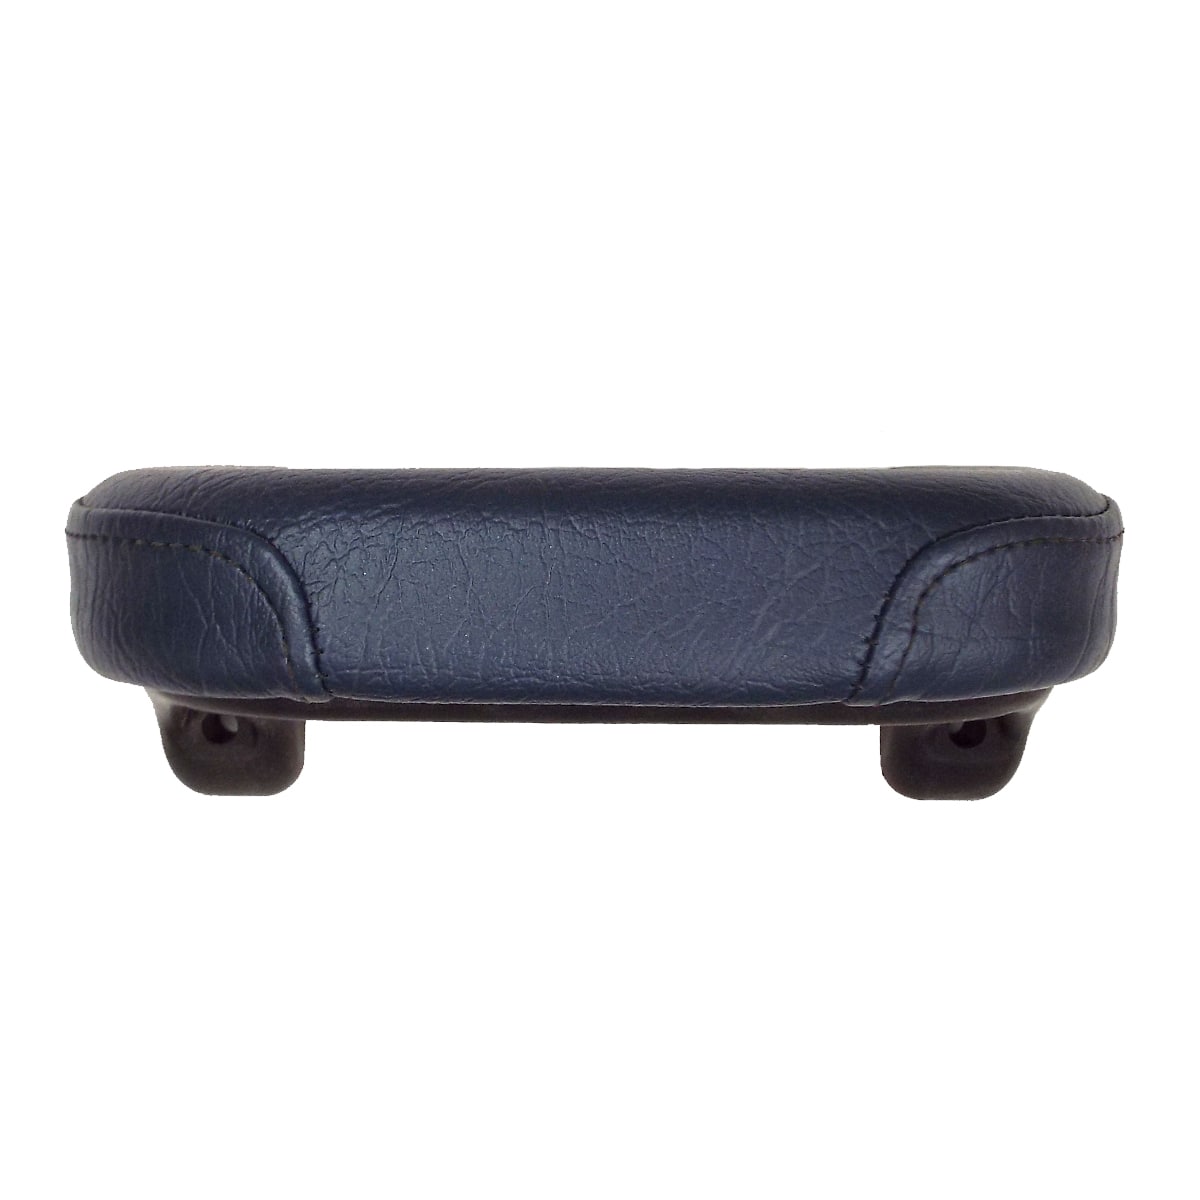 1954-1955 Arm Rest Blue For Deluxe Cab Interiors Chevrolet and GMC Pickup Truck